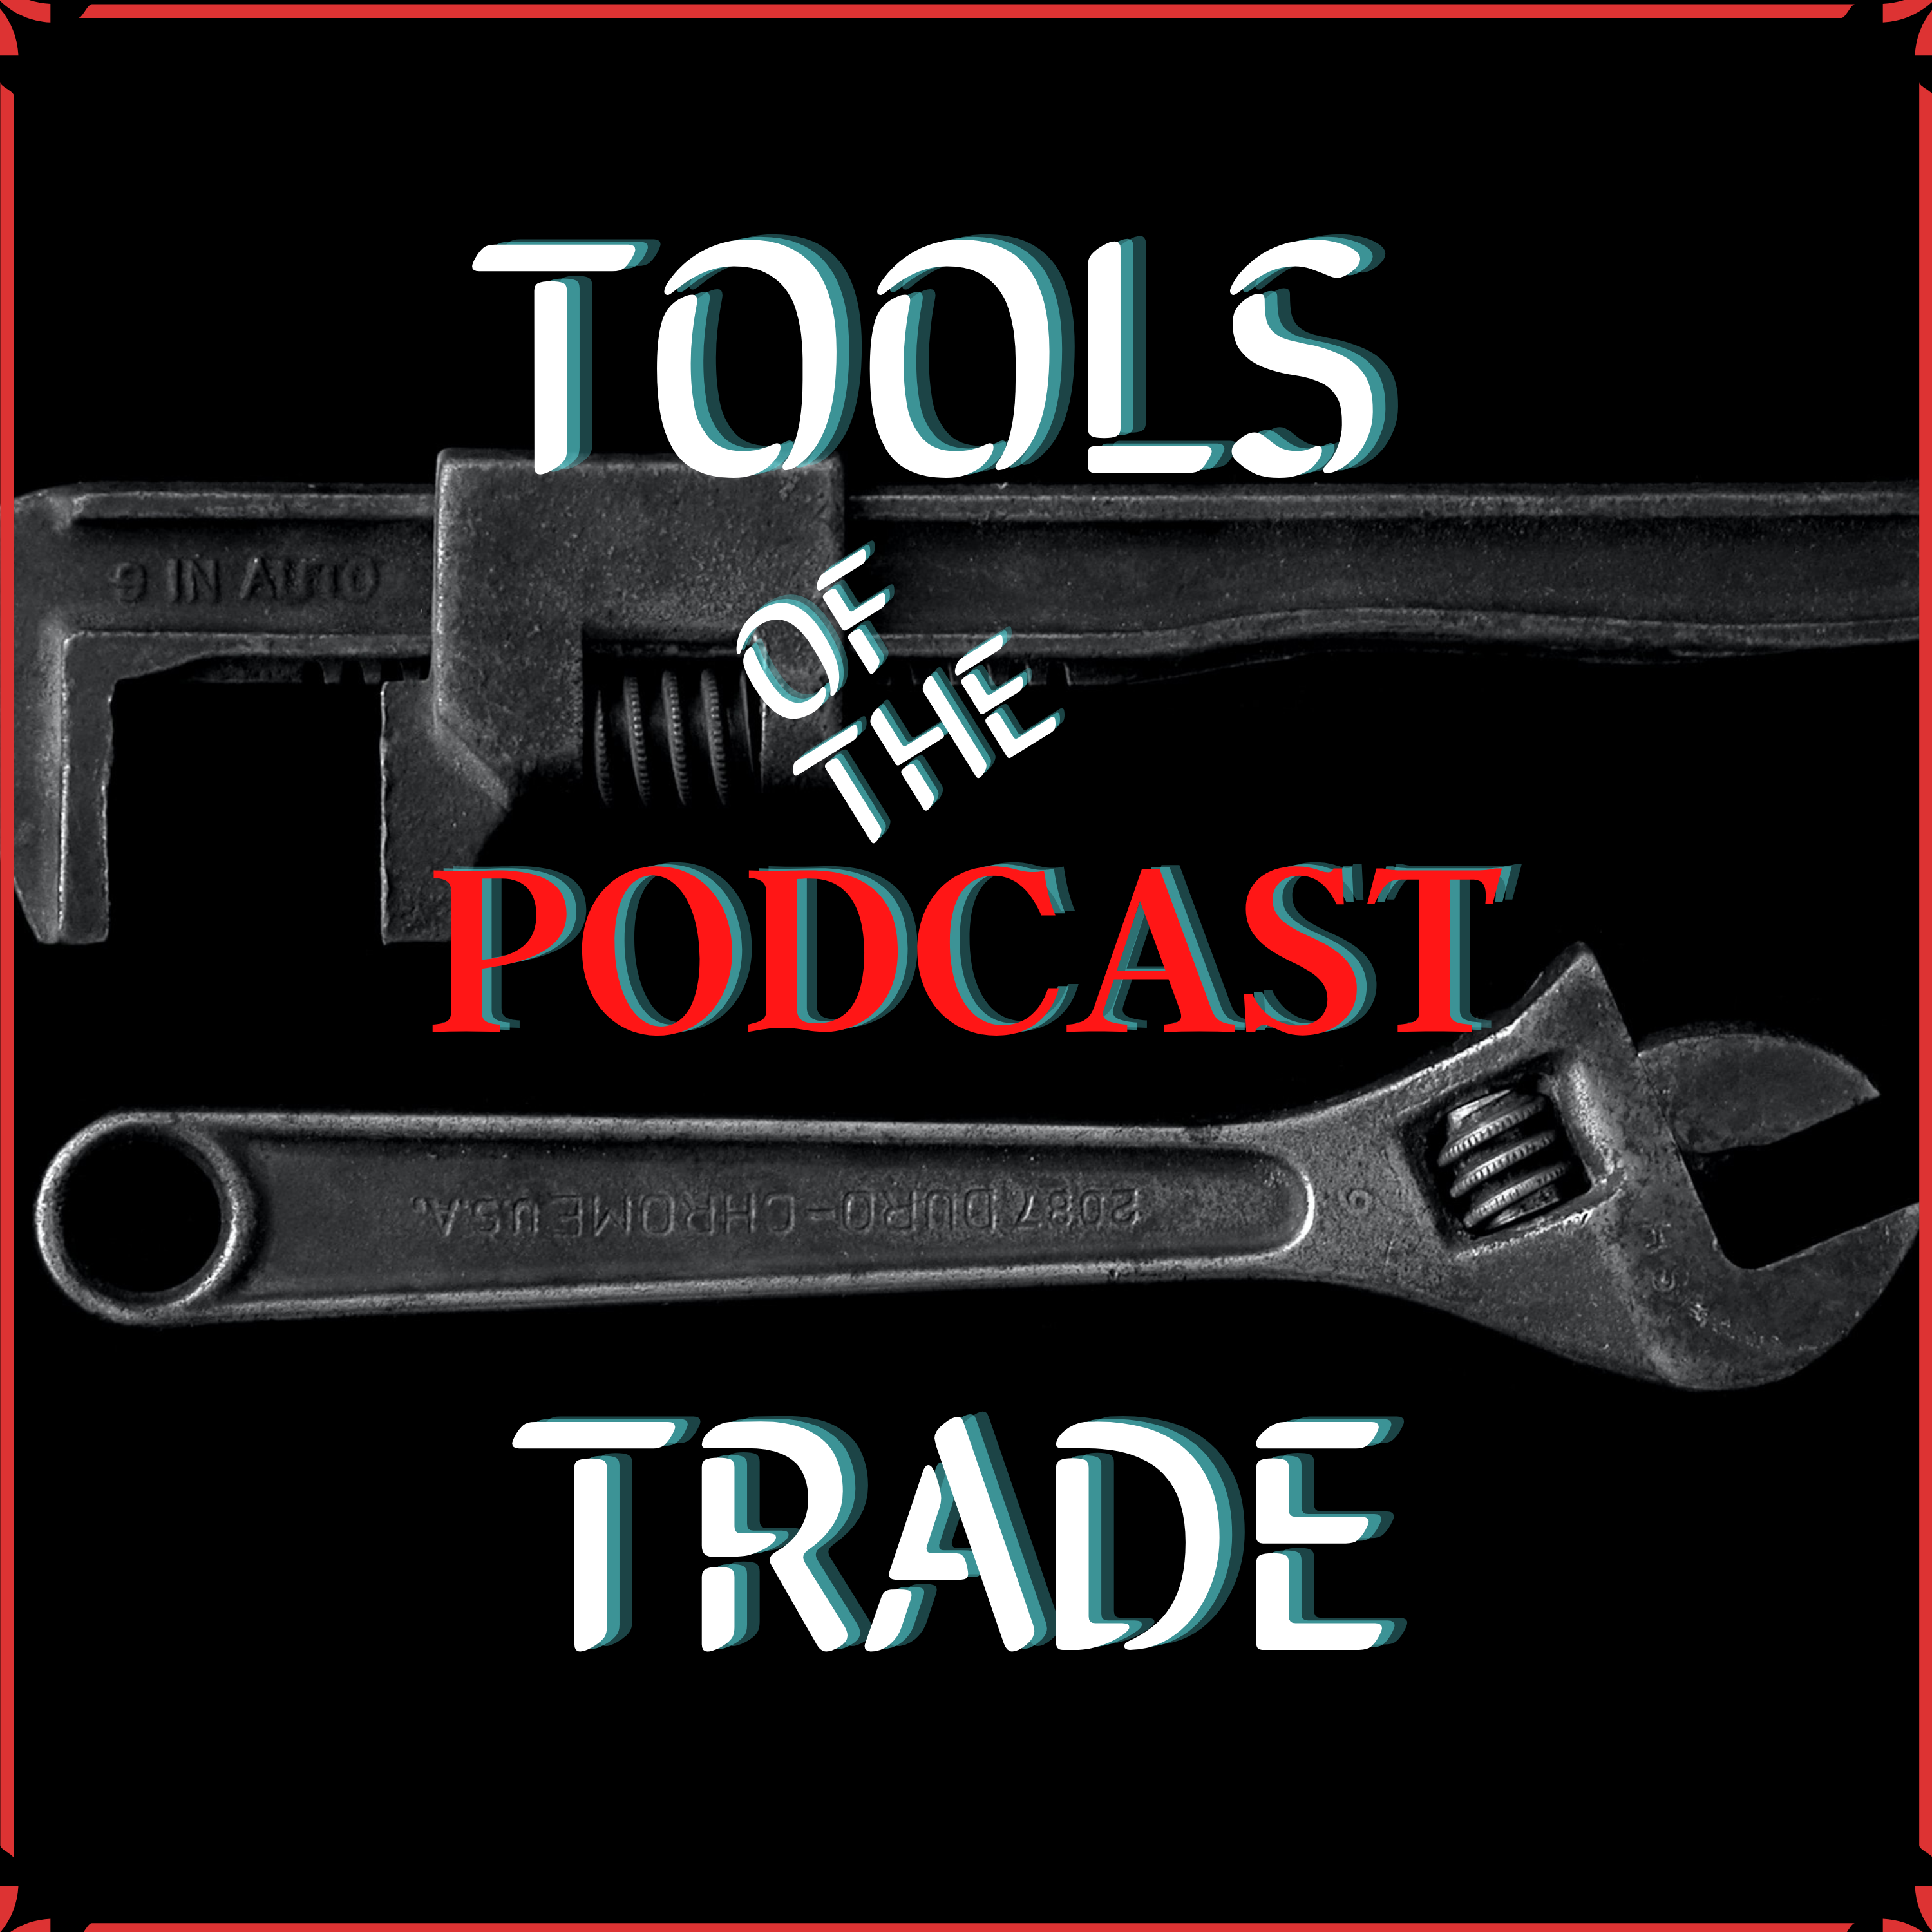 Artwork for podcast Tools of the Podcast Trade